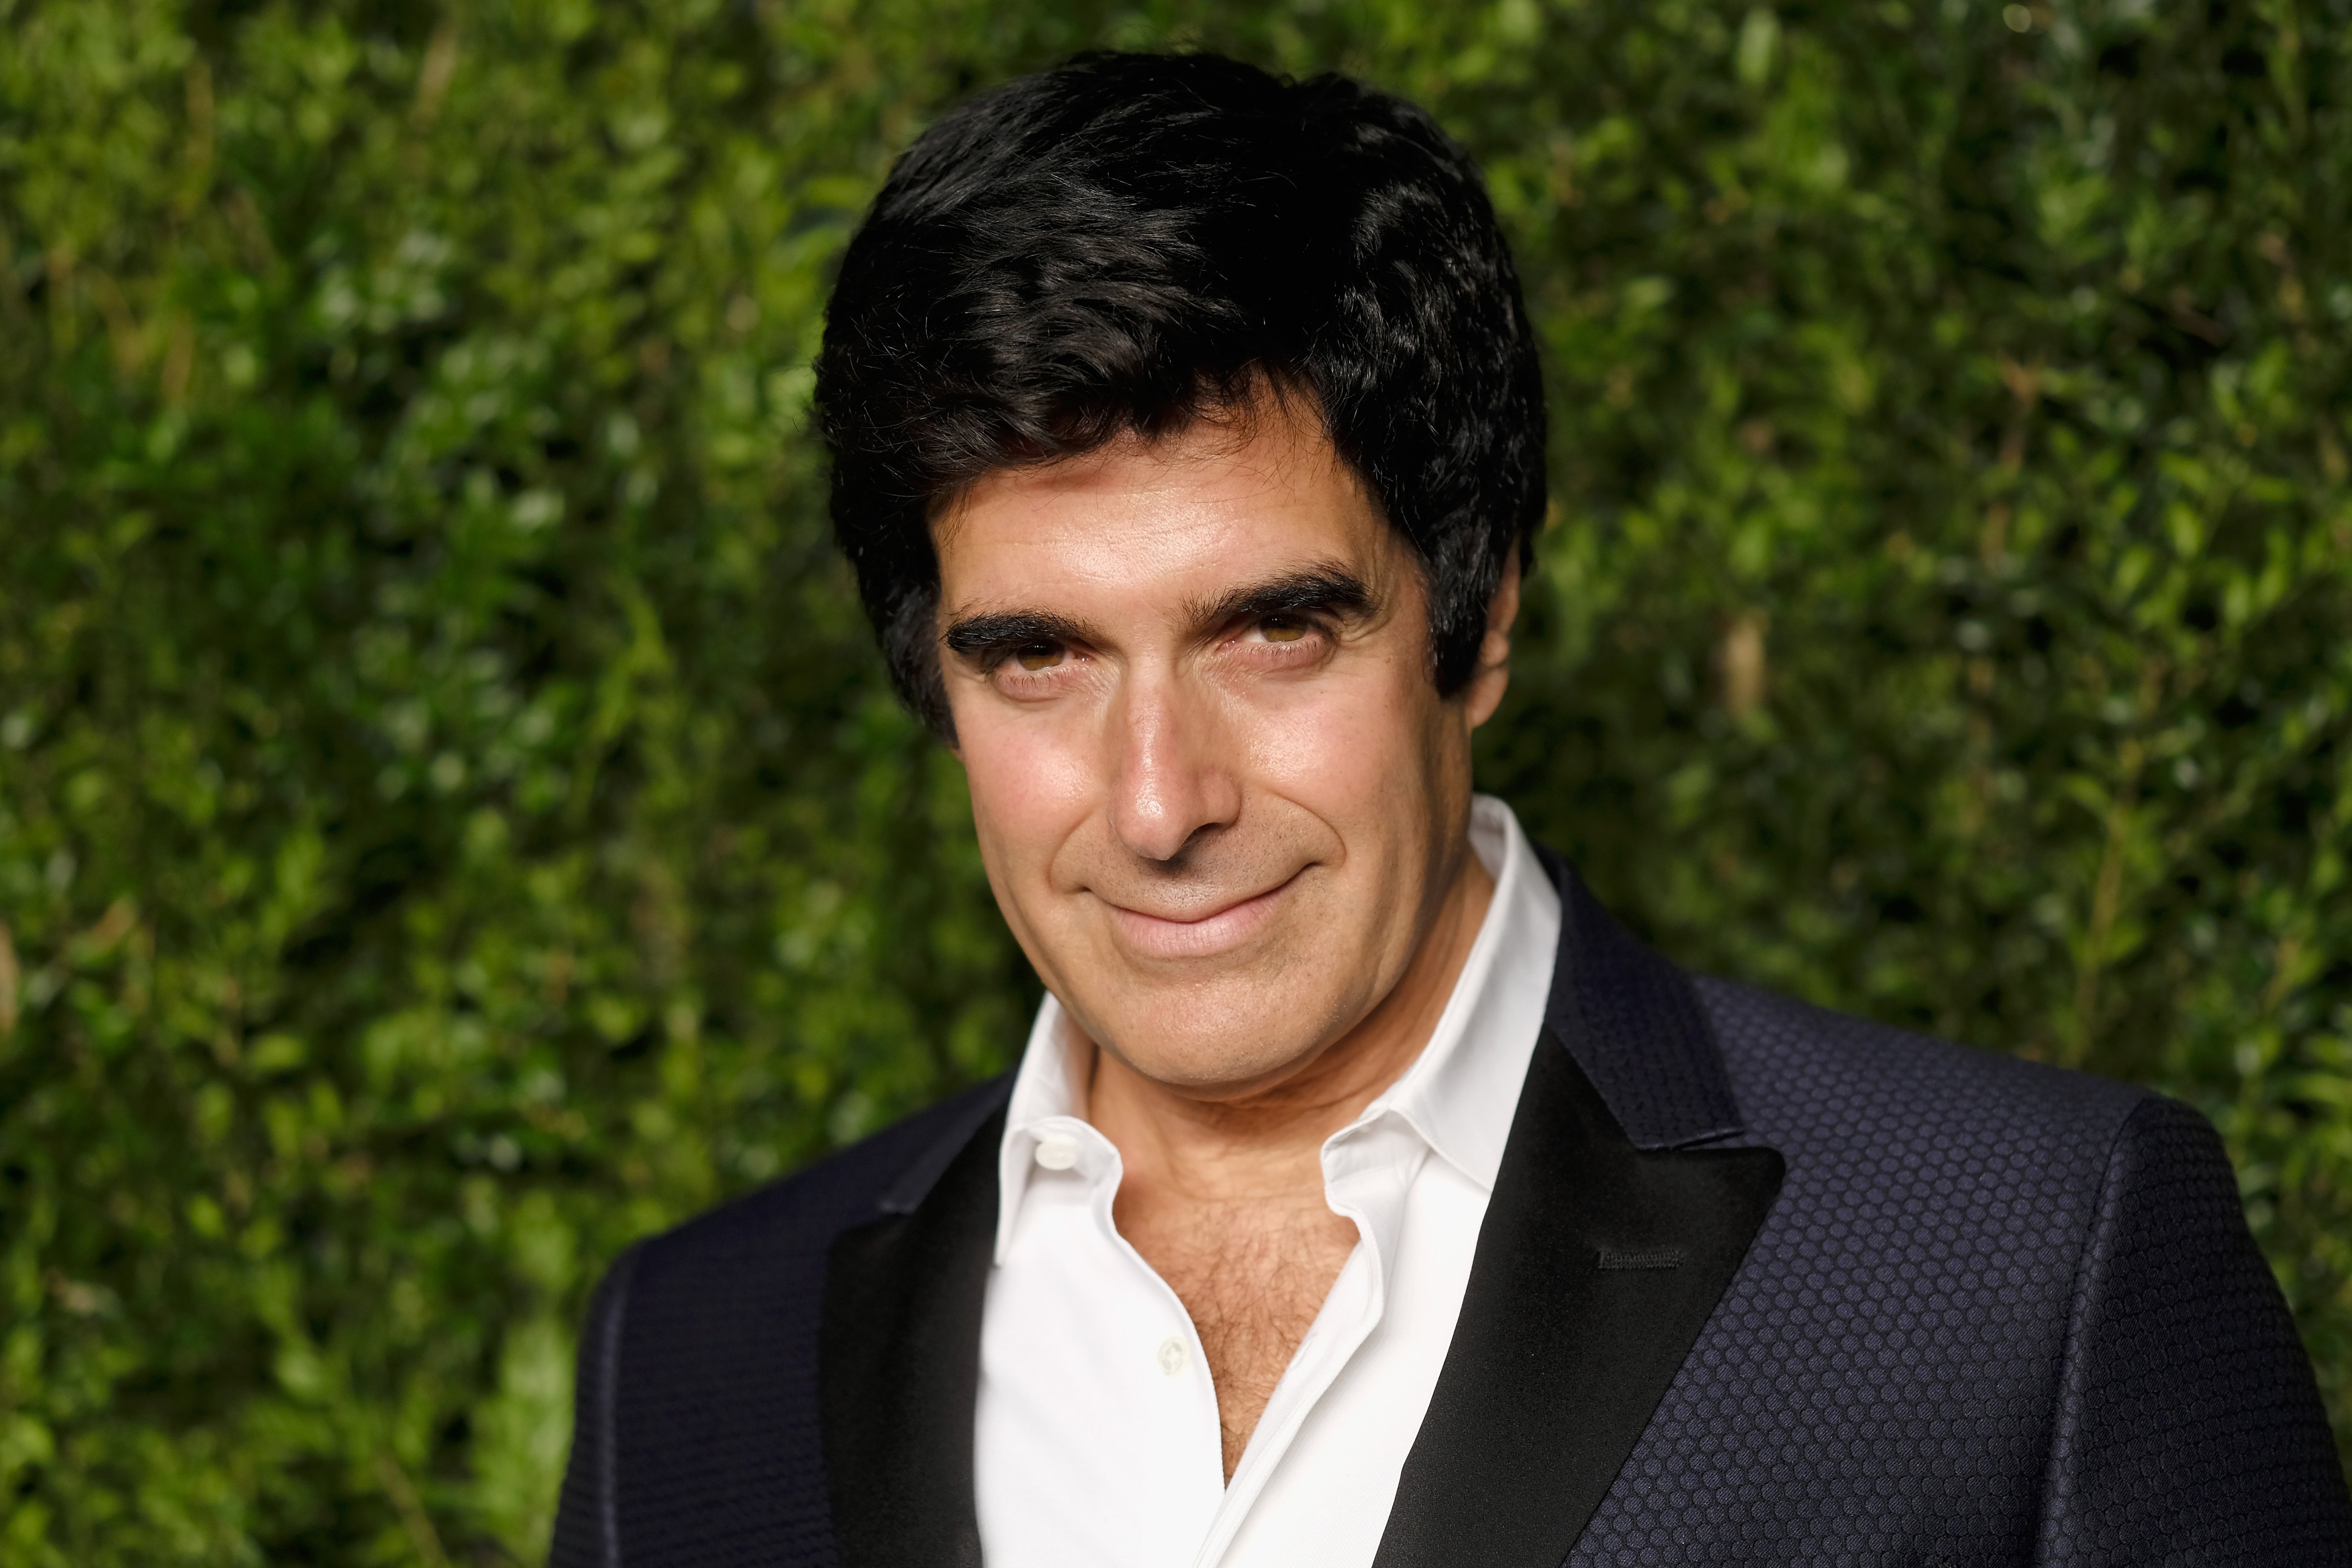 Illusionist David Copperfield attends 13th Annual CFDA/Vogue Fashion Fund Awards at Spring Studios on November 7, 2016 in New York City. (Dimitrios Kambouris—Getty Images)